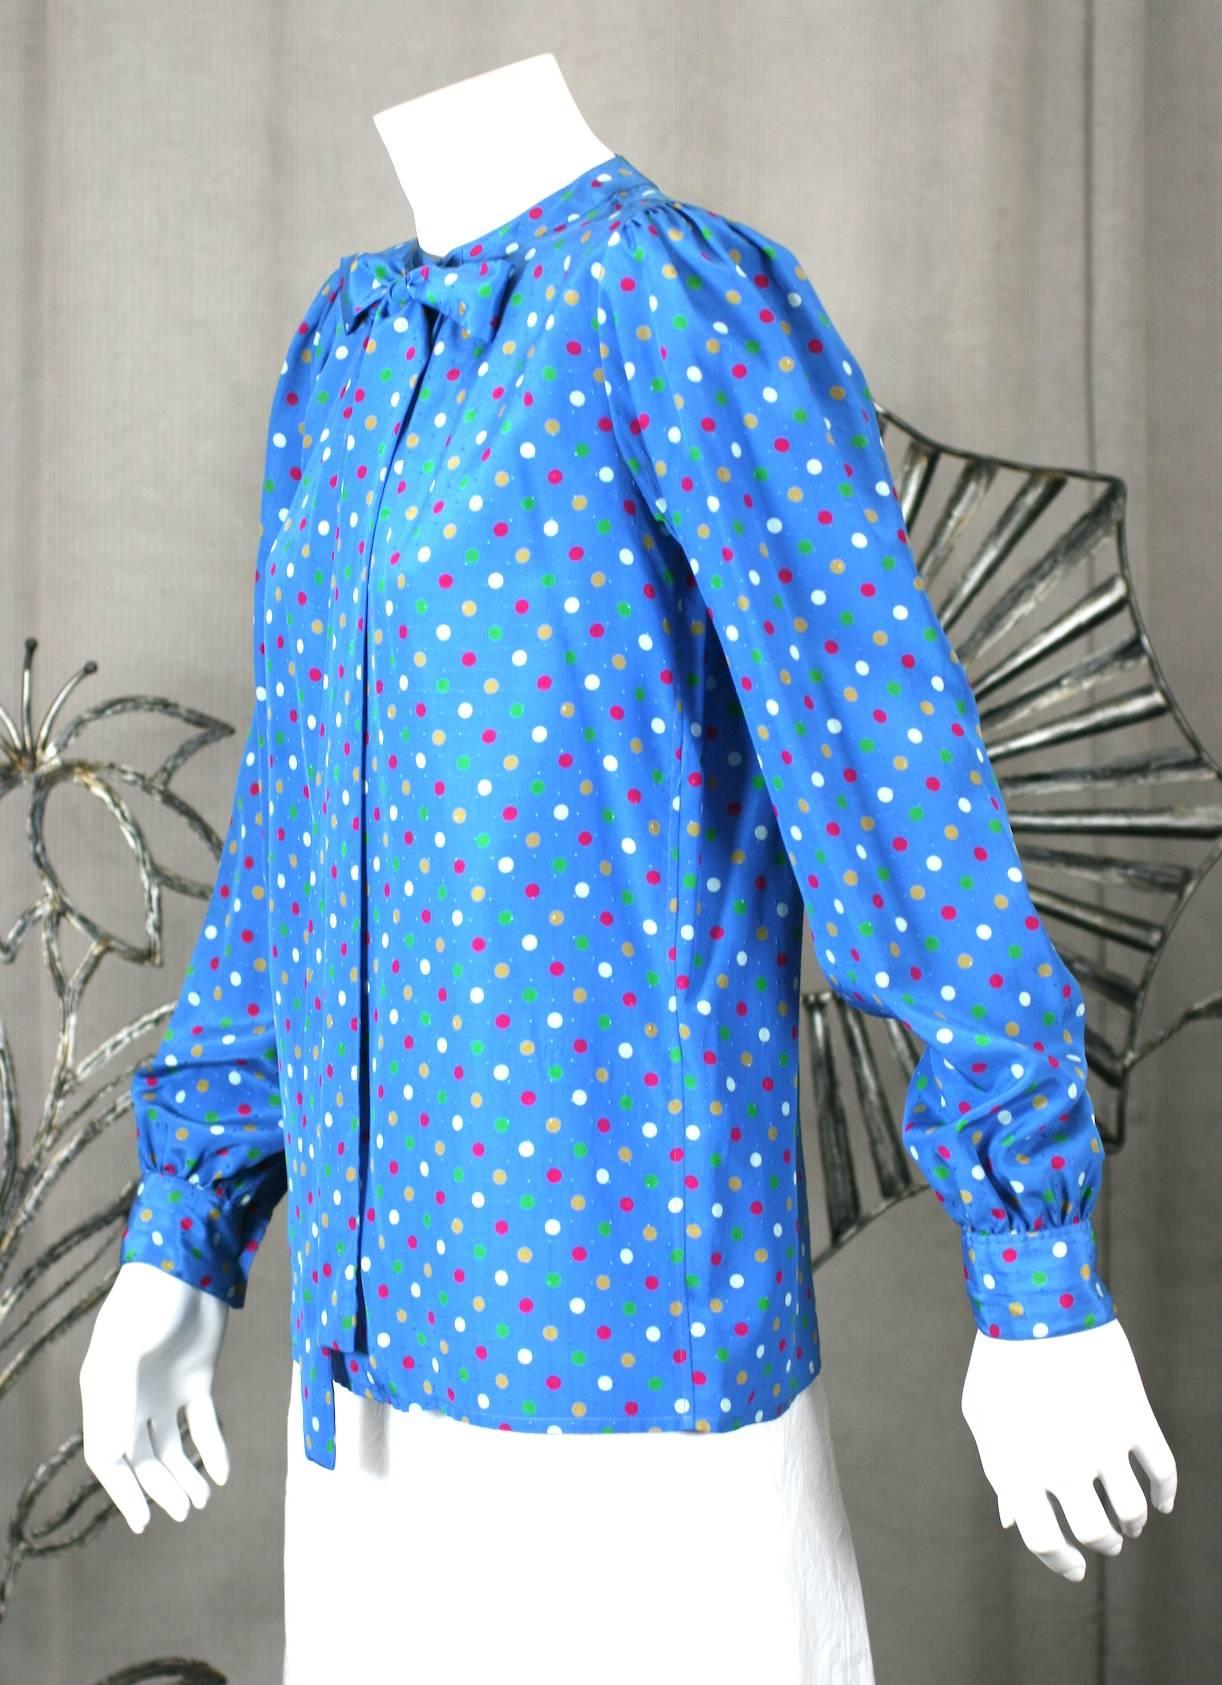 Yves Saint Laurent Polka Dot Bow Blouse with many transformative options. Can be worn tied or open with streamers hanging for a more relaxed look. 
One button at neck with deep, subversive, front slit below. Size 34, France 1970's. Excellent